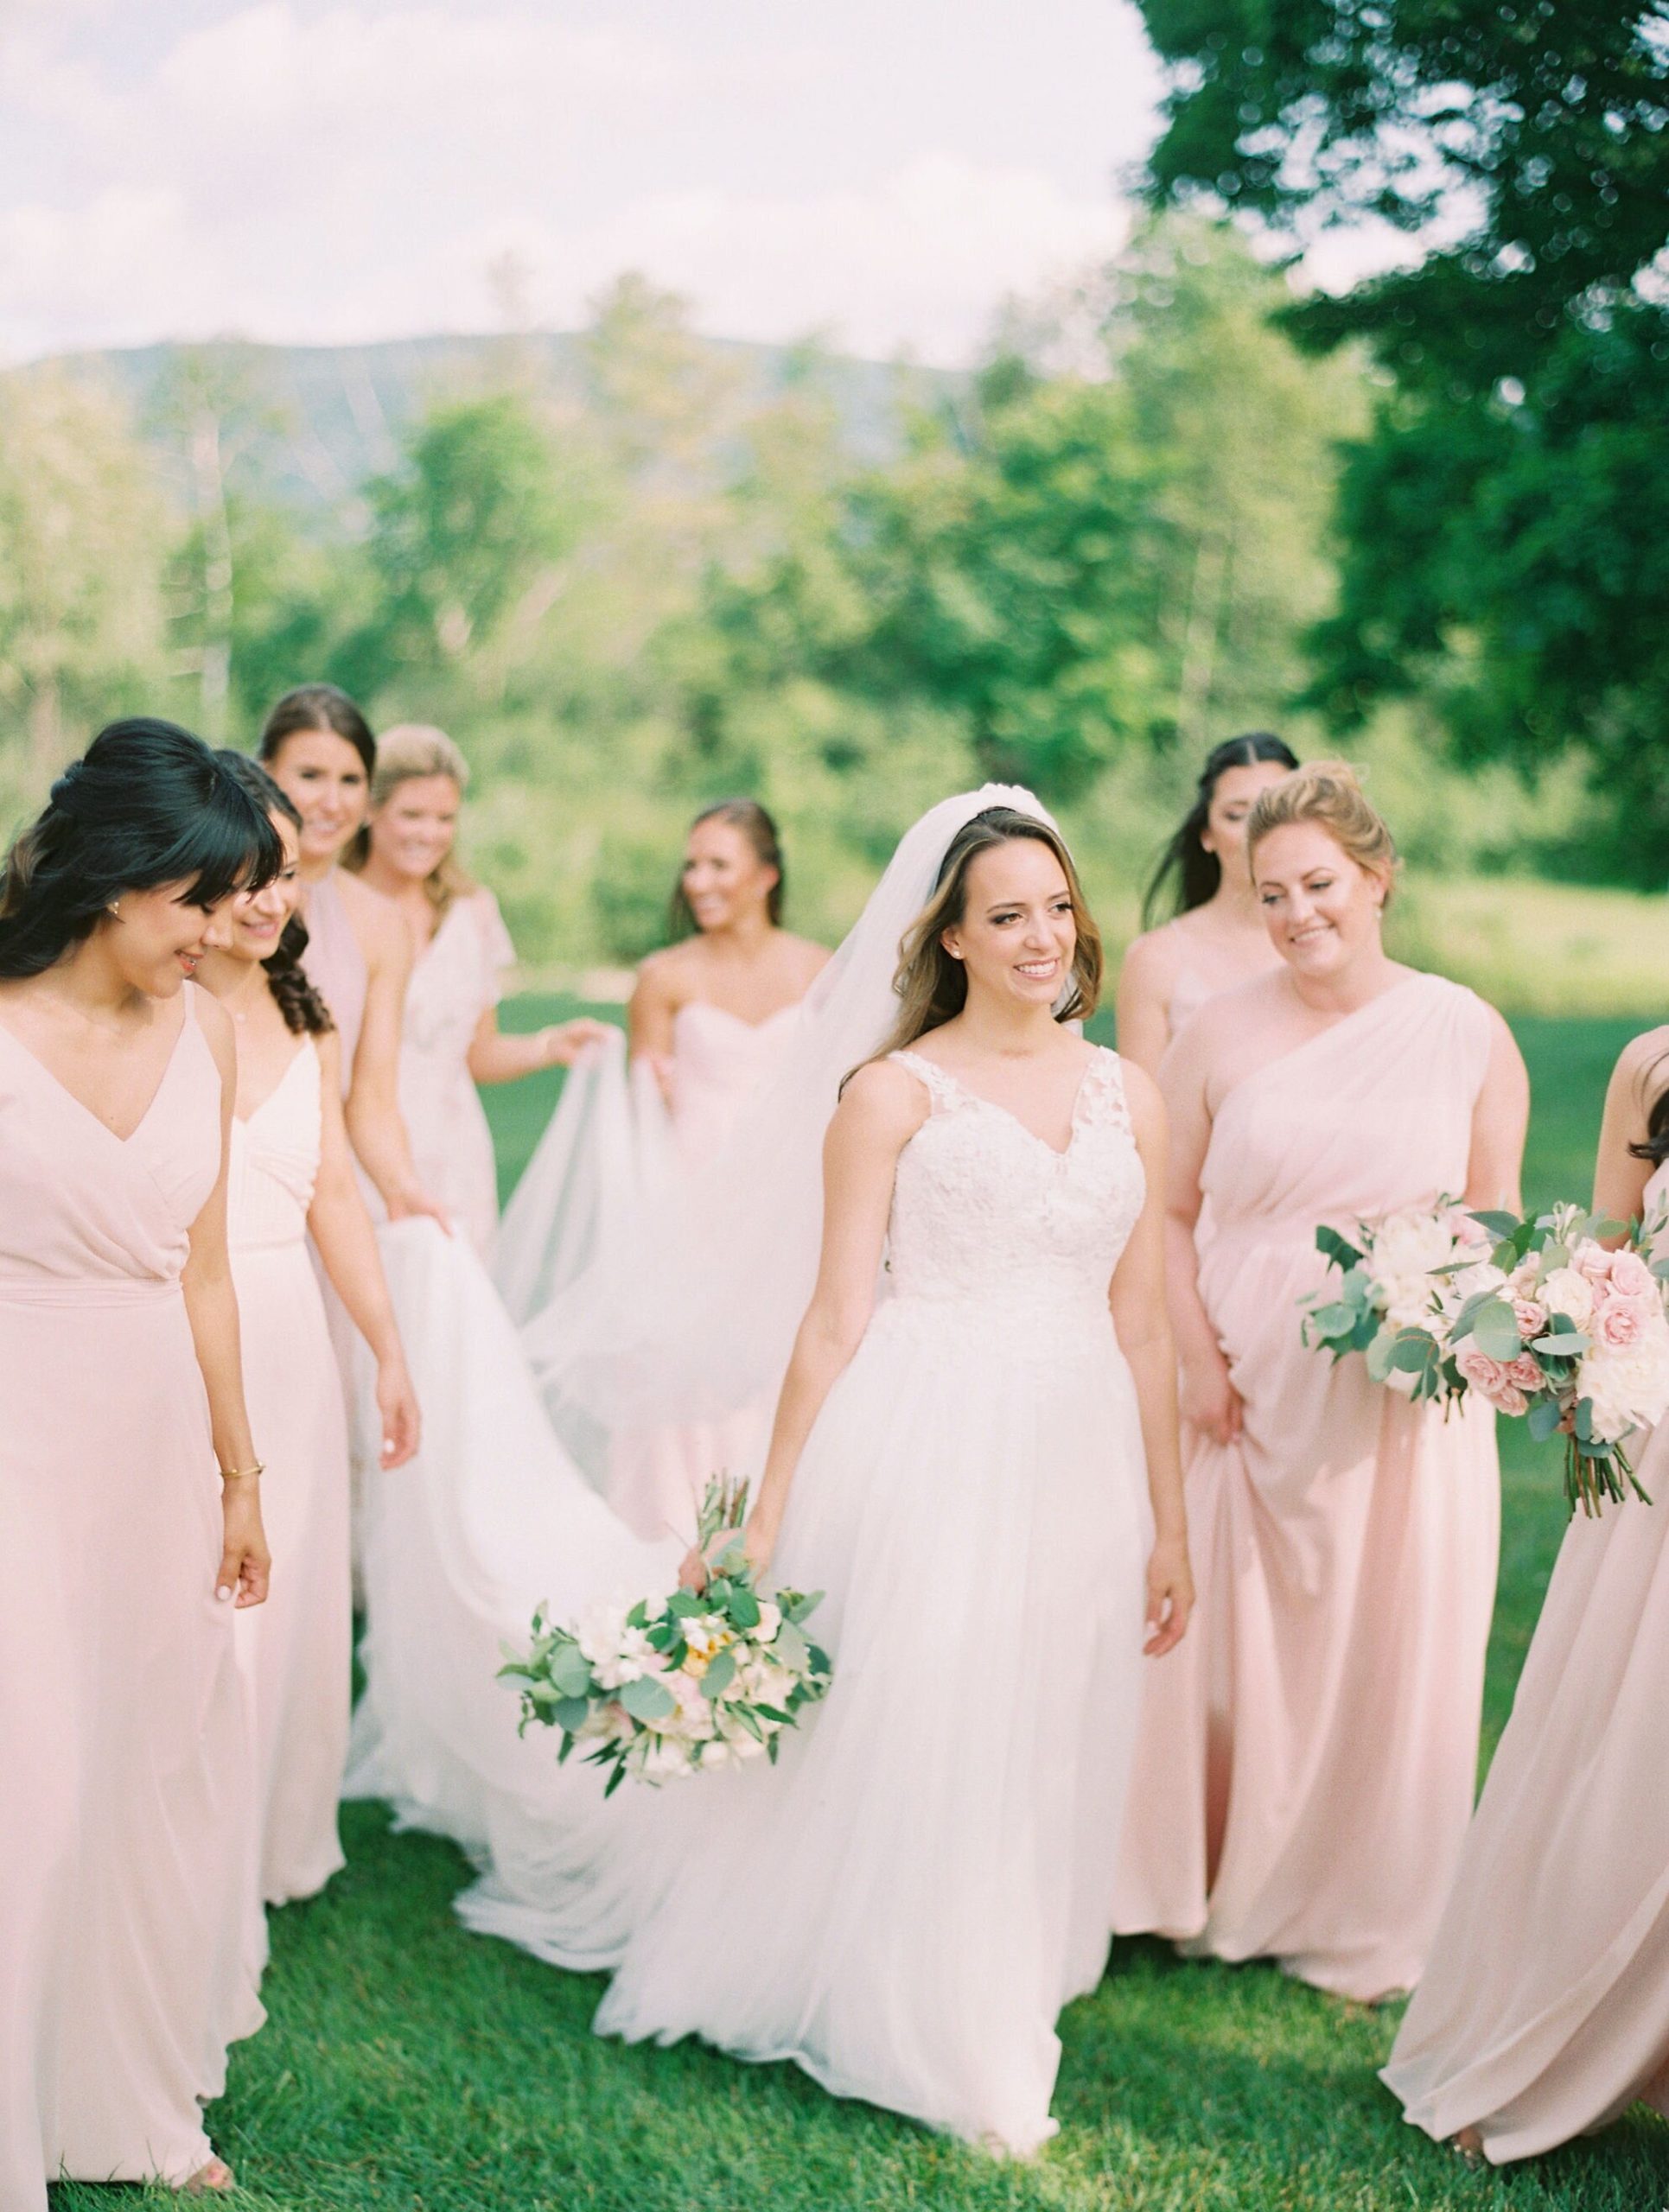 Have Fun With Your Bride Tribe!  Photo: Clary Pfeiffer Photography